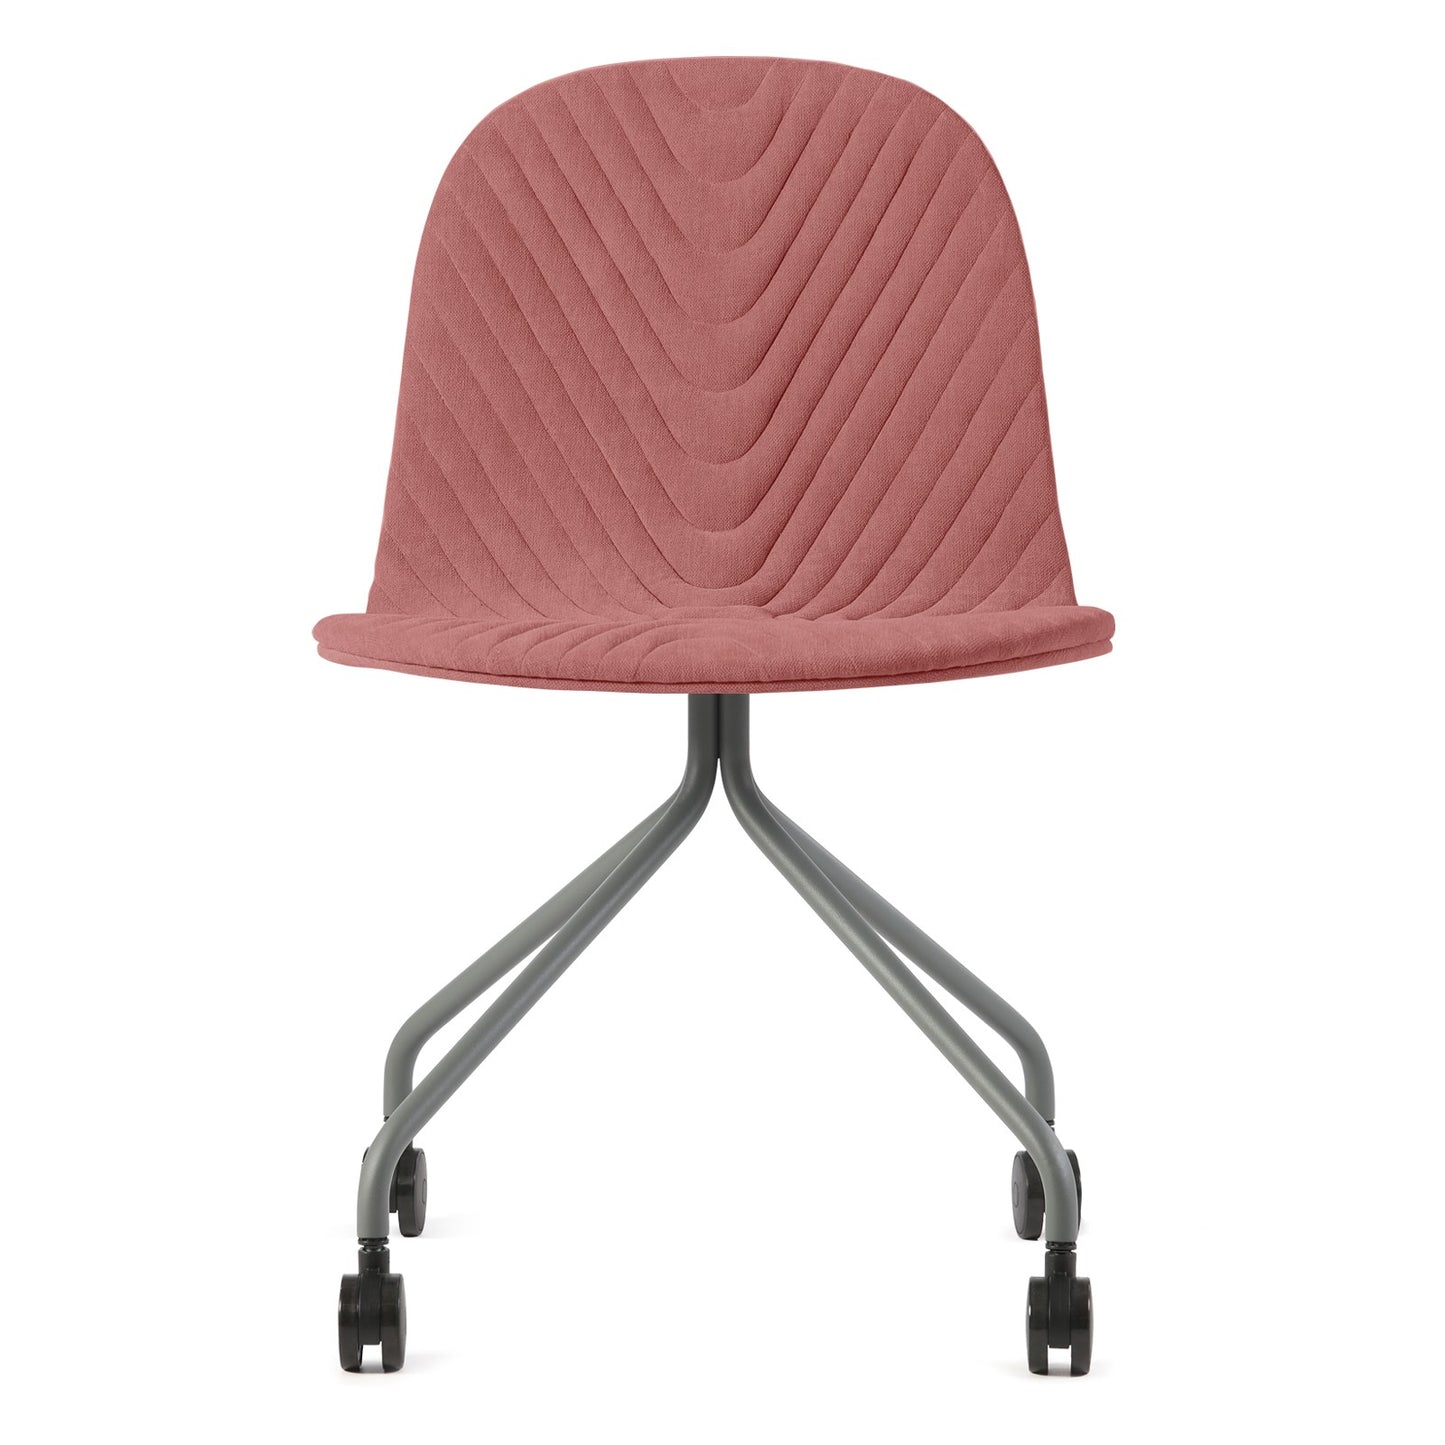 Chair Mannequin 04 - Dusty Rose